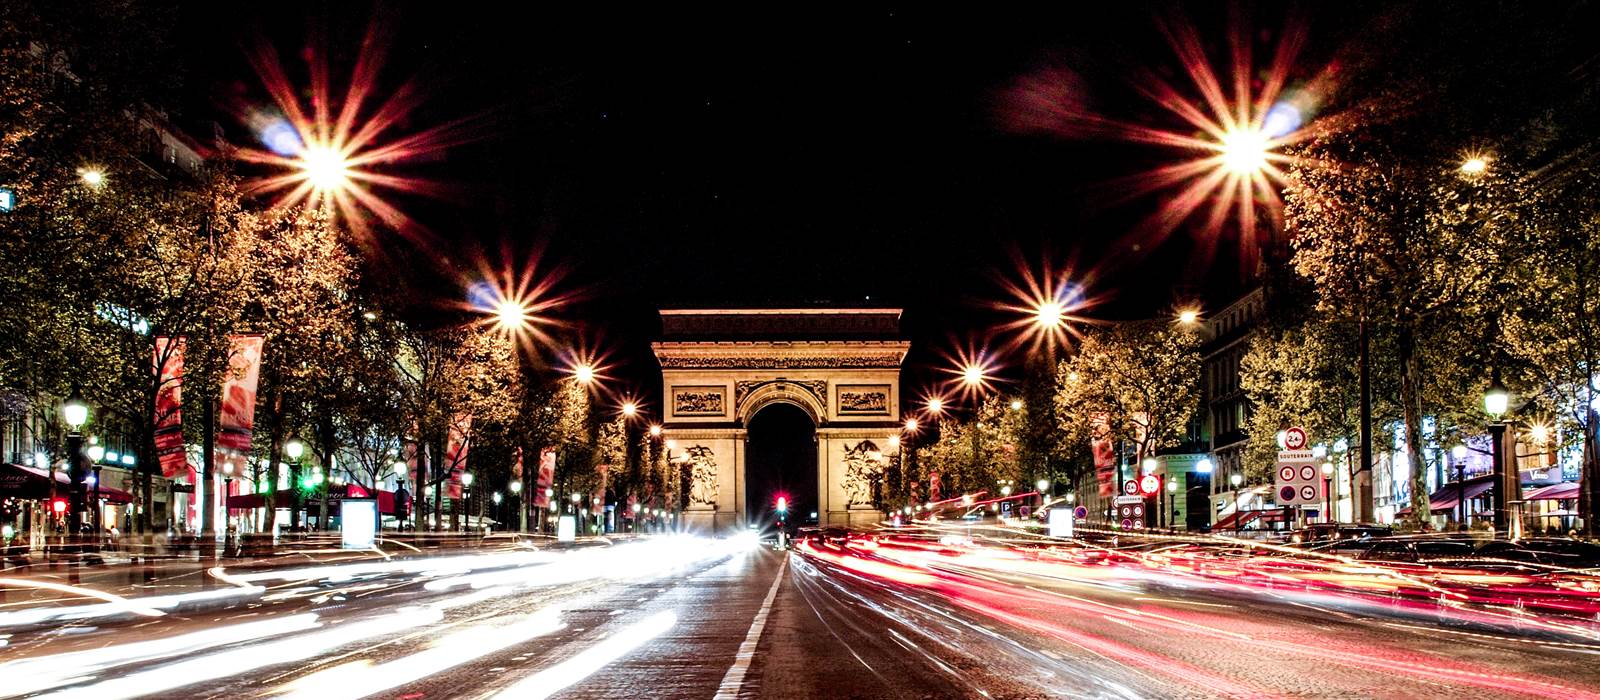 Street view of Champs-Elysees Avenue with building LOUIS VUITTON